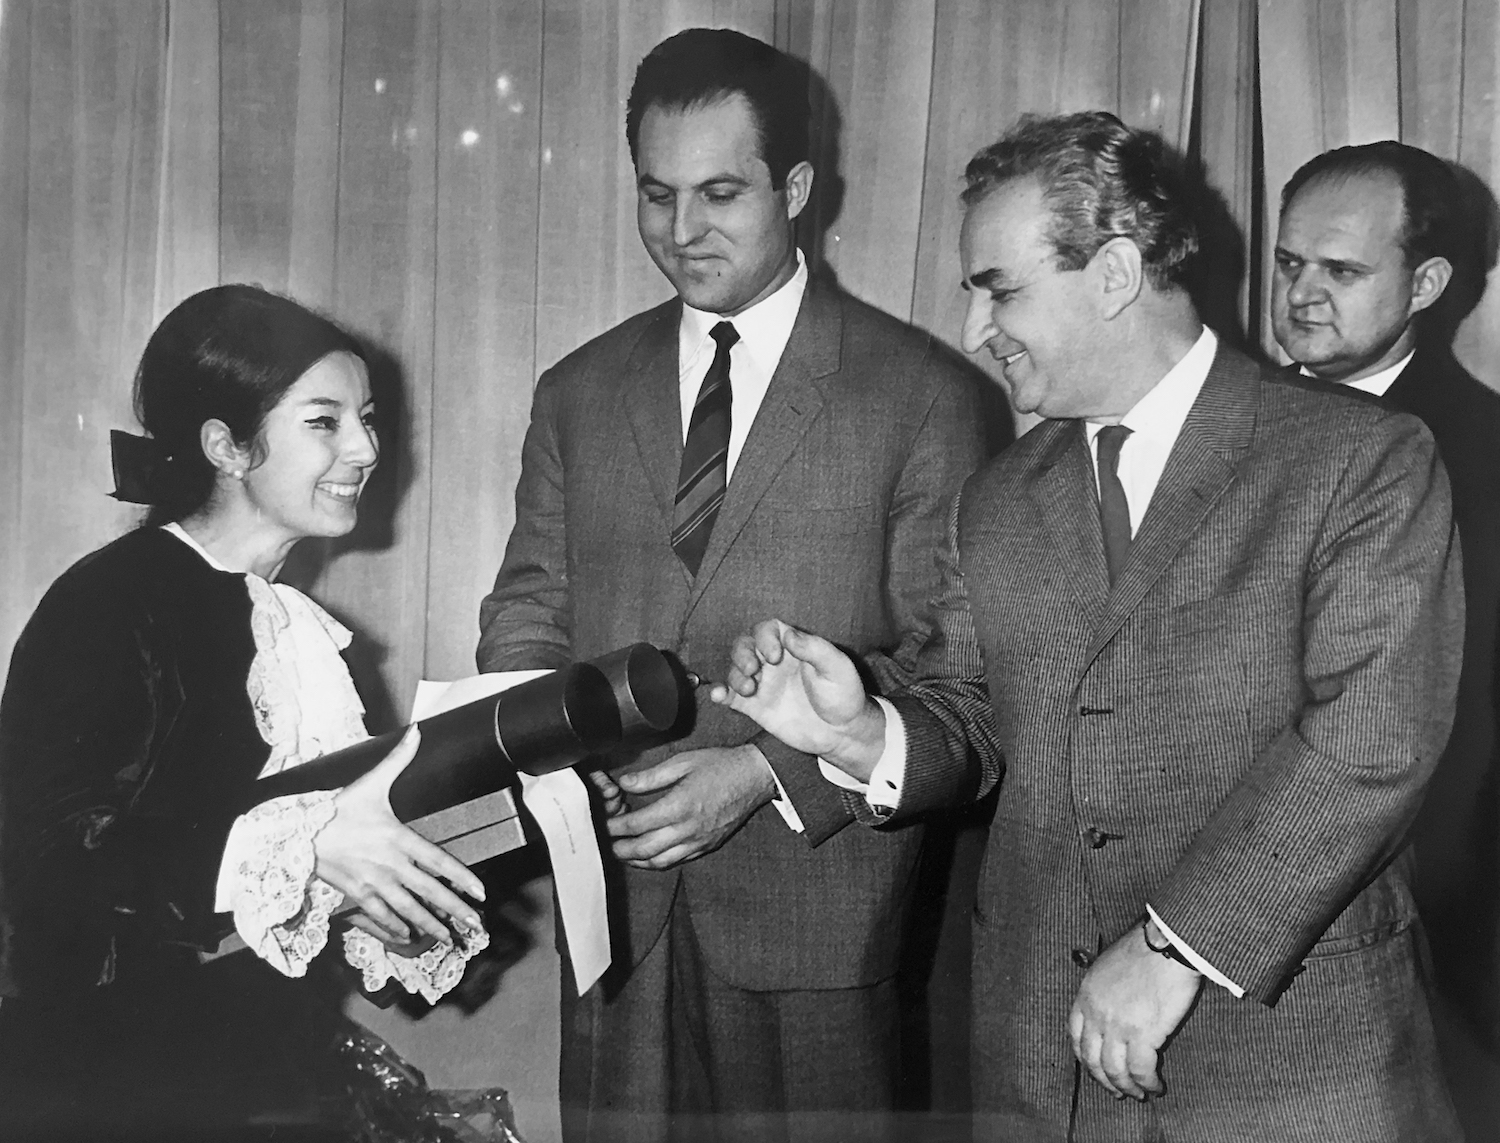 Radević receiving an award in 1967. Image: personal archive